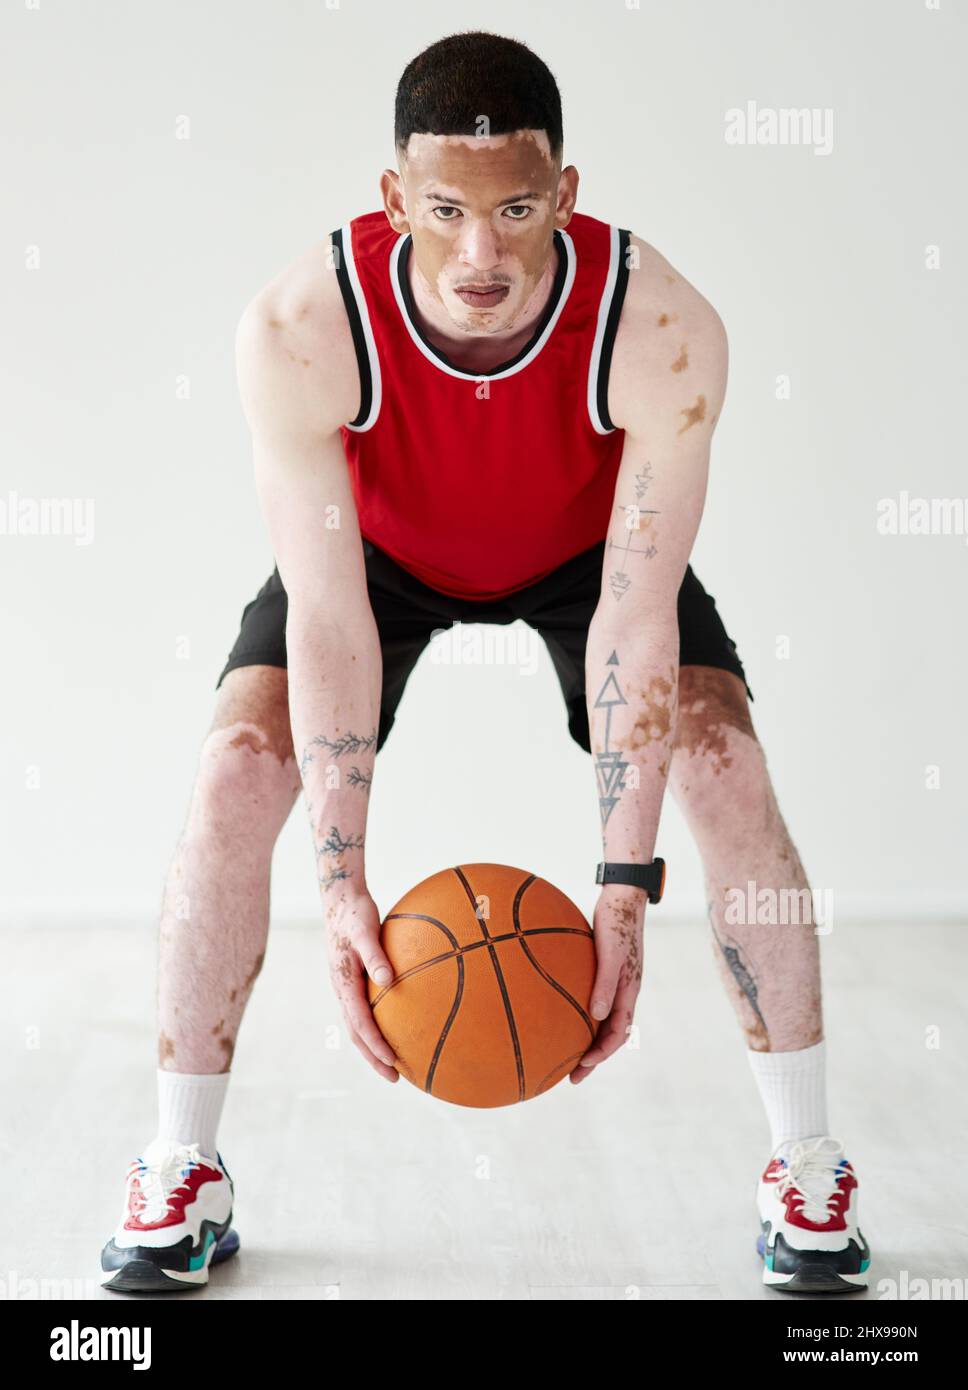 Wanna ball. Full length portrait of a handsome young male basketball player posing in studio. Stock Photo